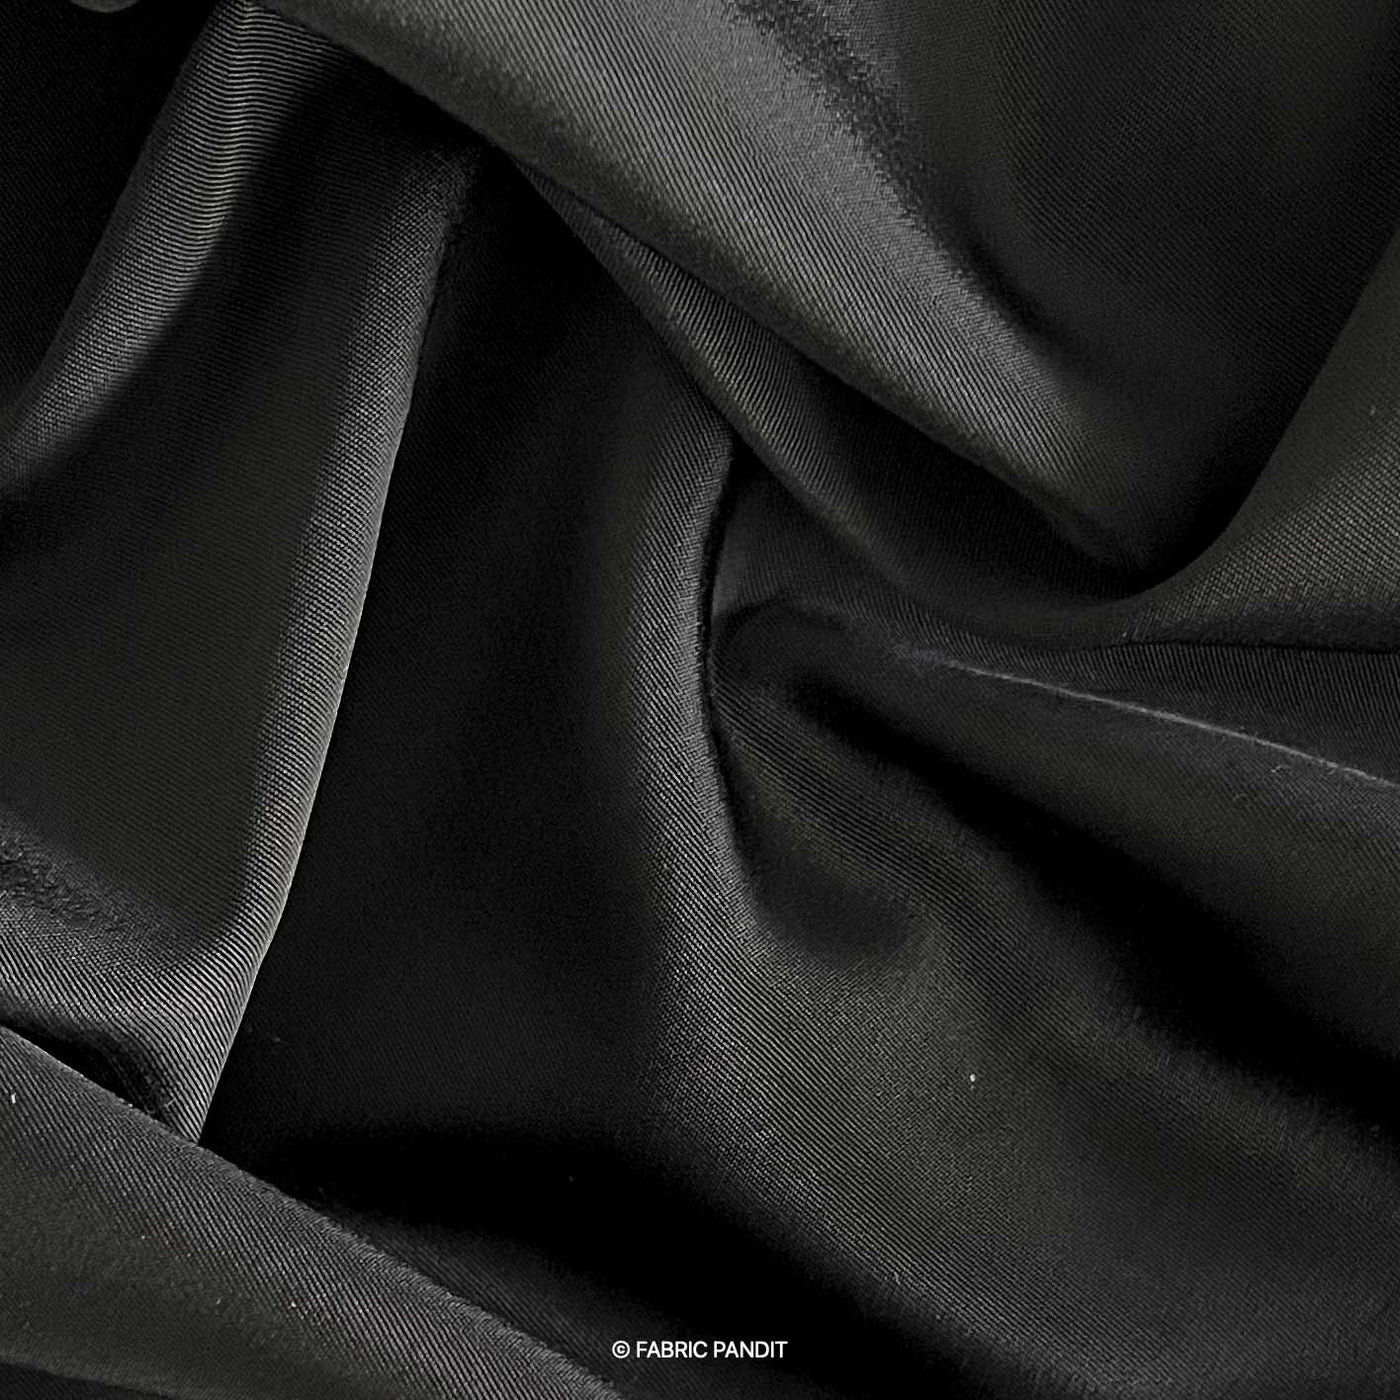 Fabric Pandit Cut Piece (CUT PIECE) Bold Black Color Premium French Crepe Fabric (Width 44 inches)